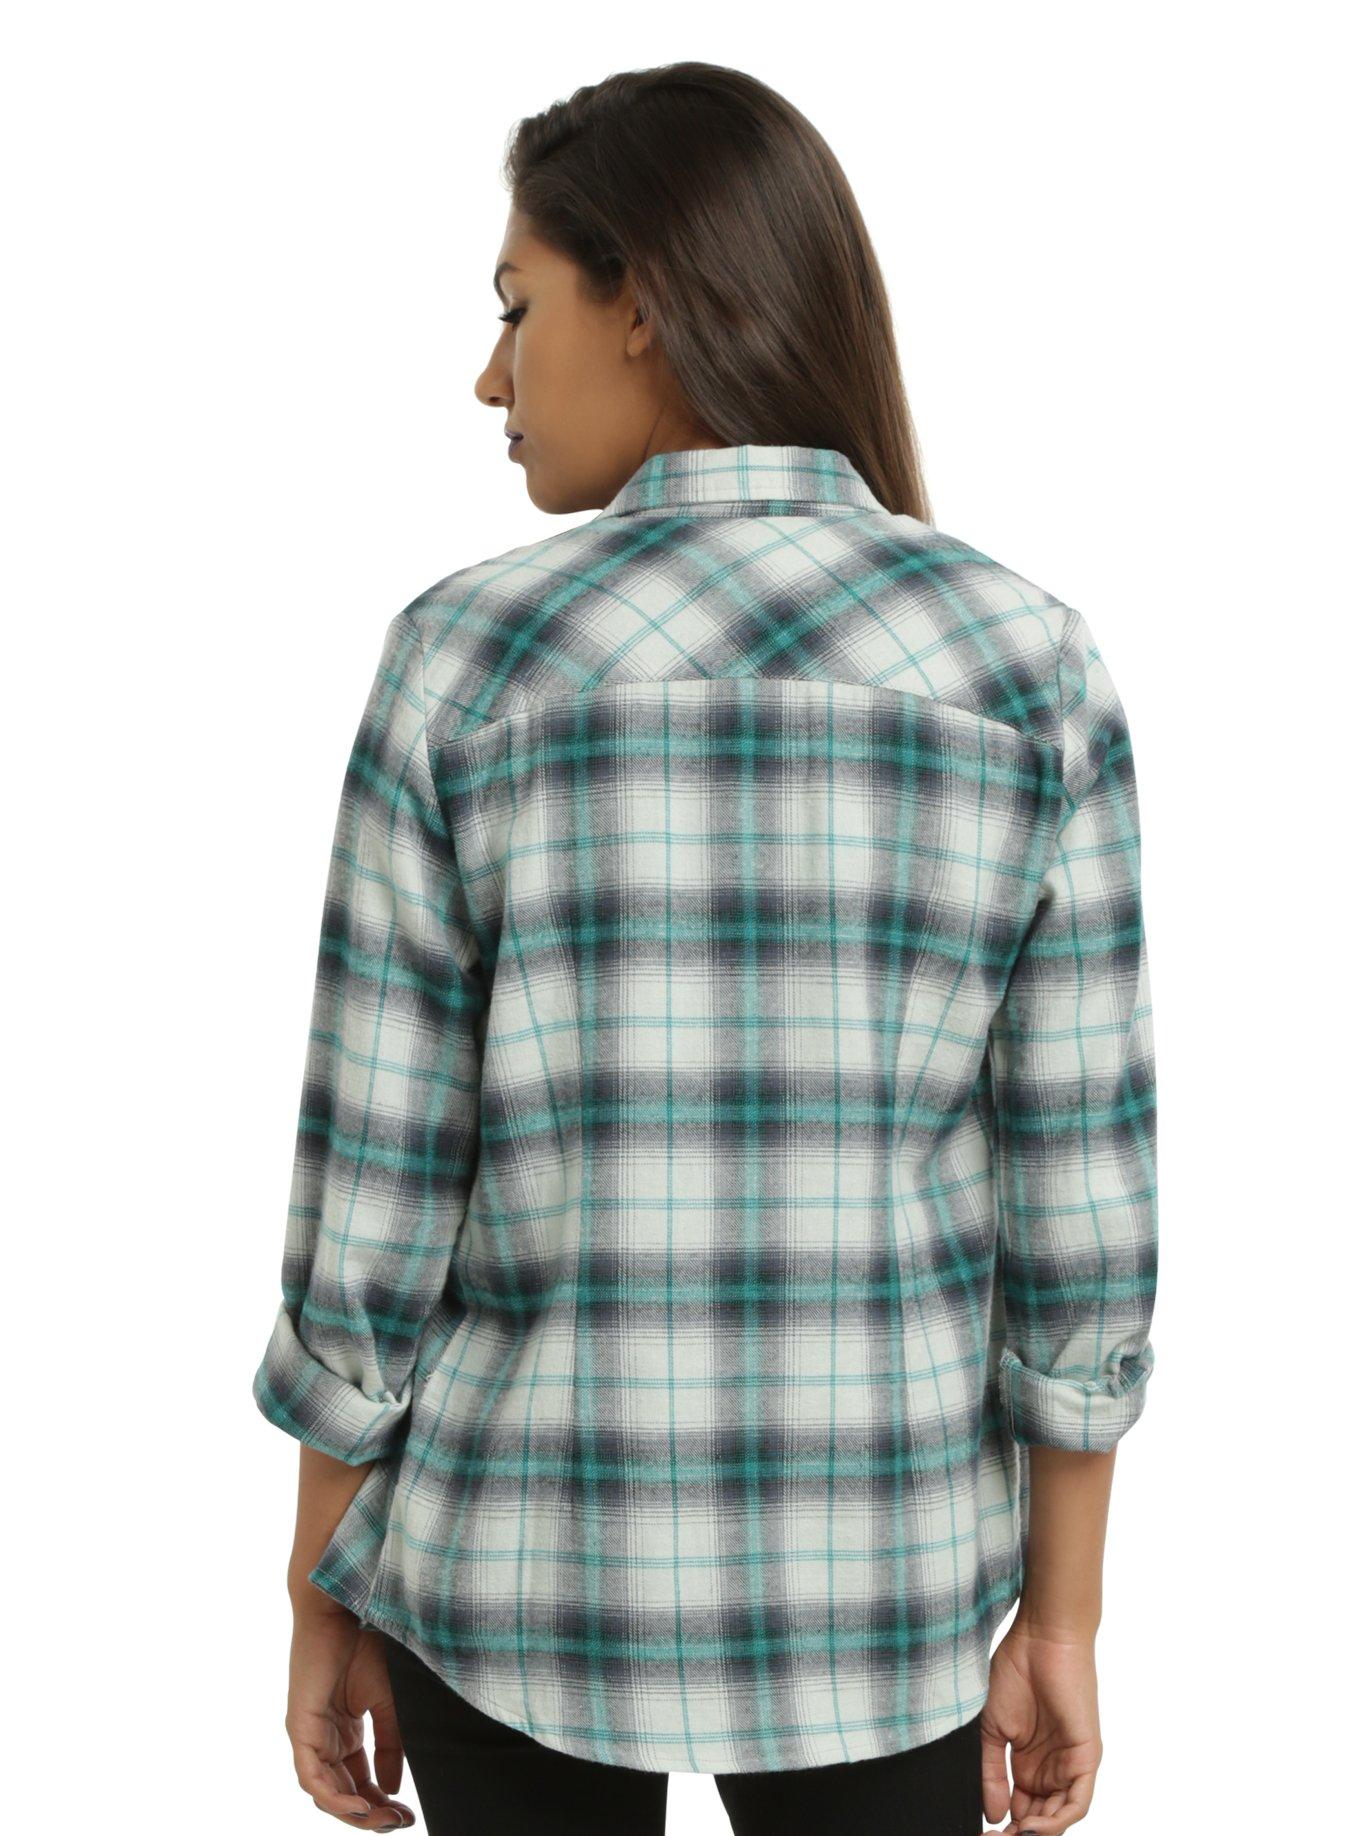 Grey & Teal Plaid Girls Woven Button-Up, , alternate